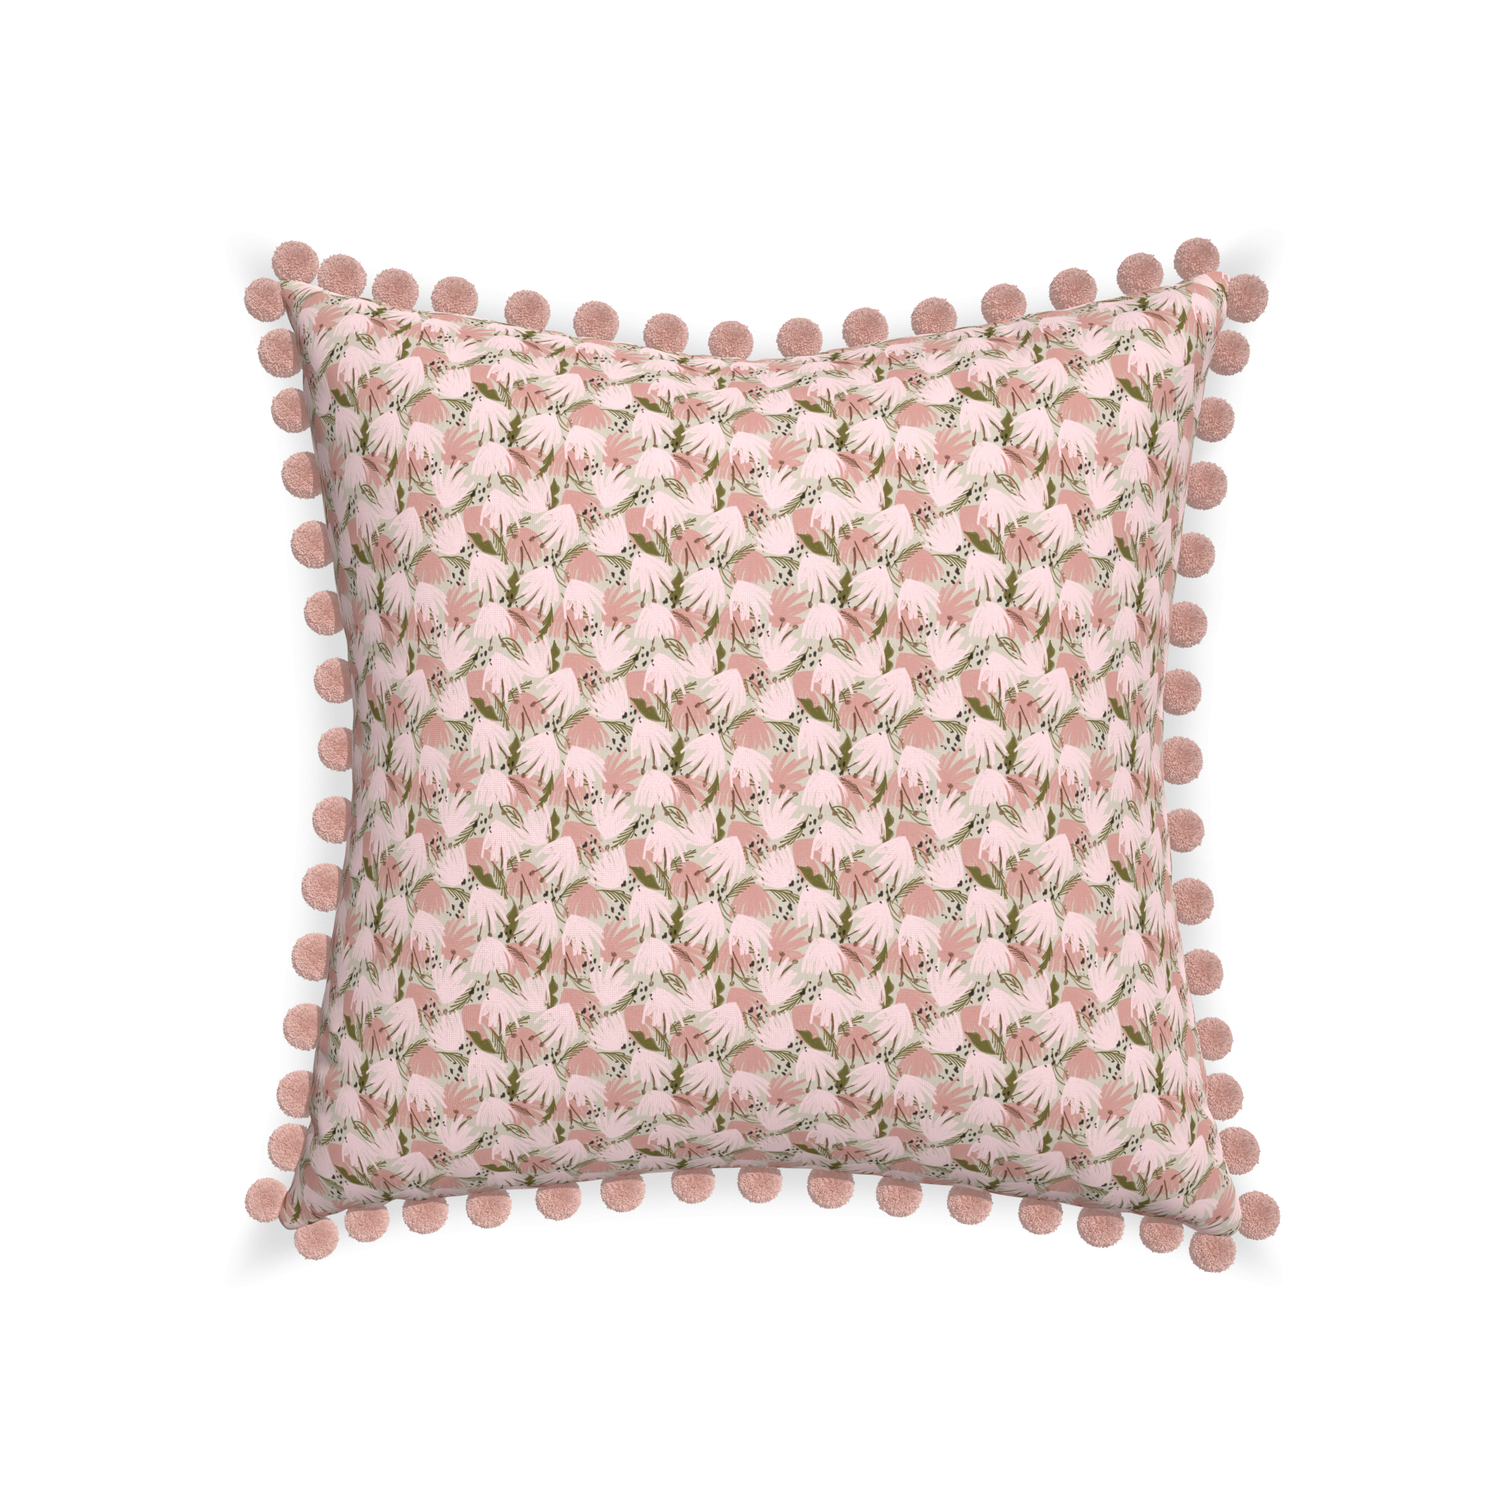 22-square eden pink custom pink floralpillow with rose pom pom on white background